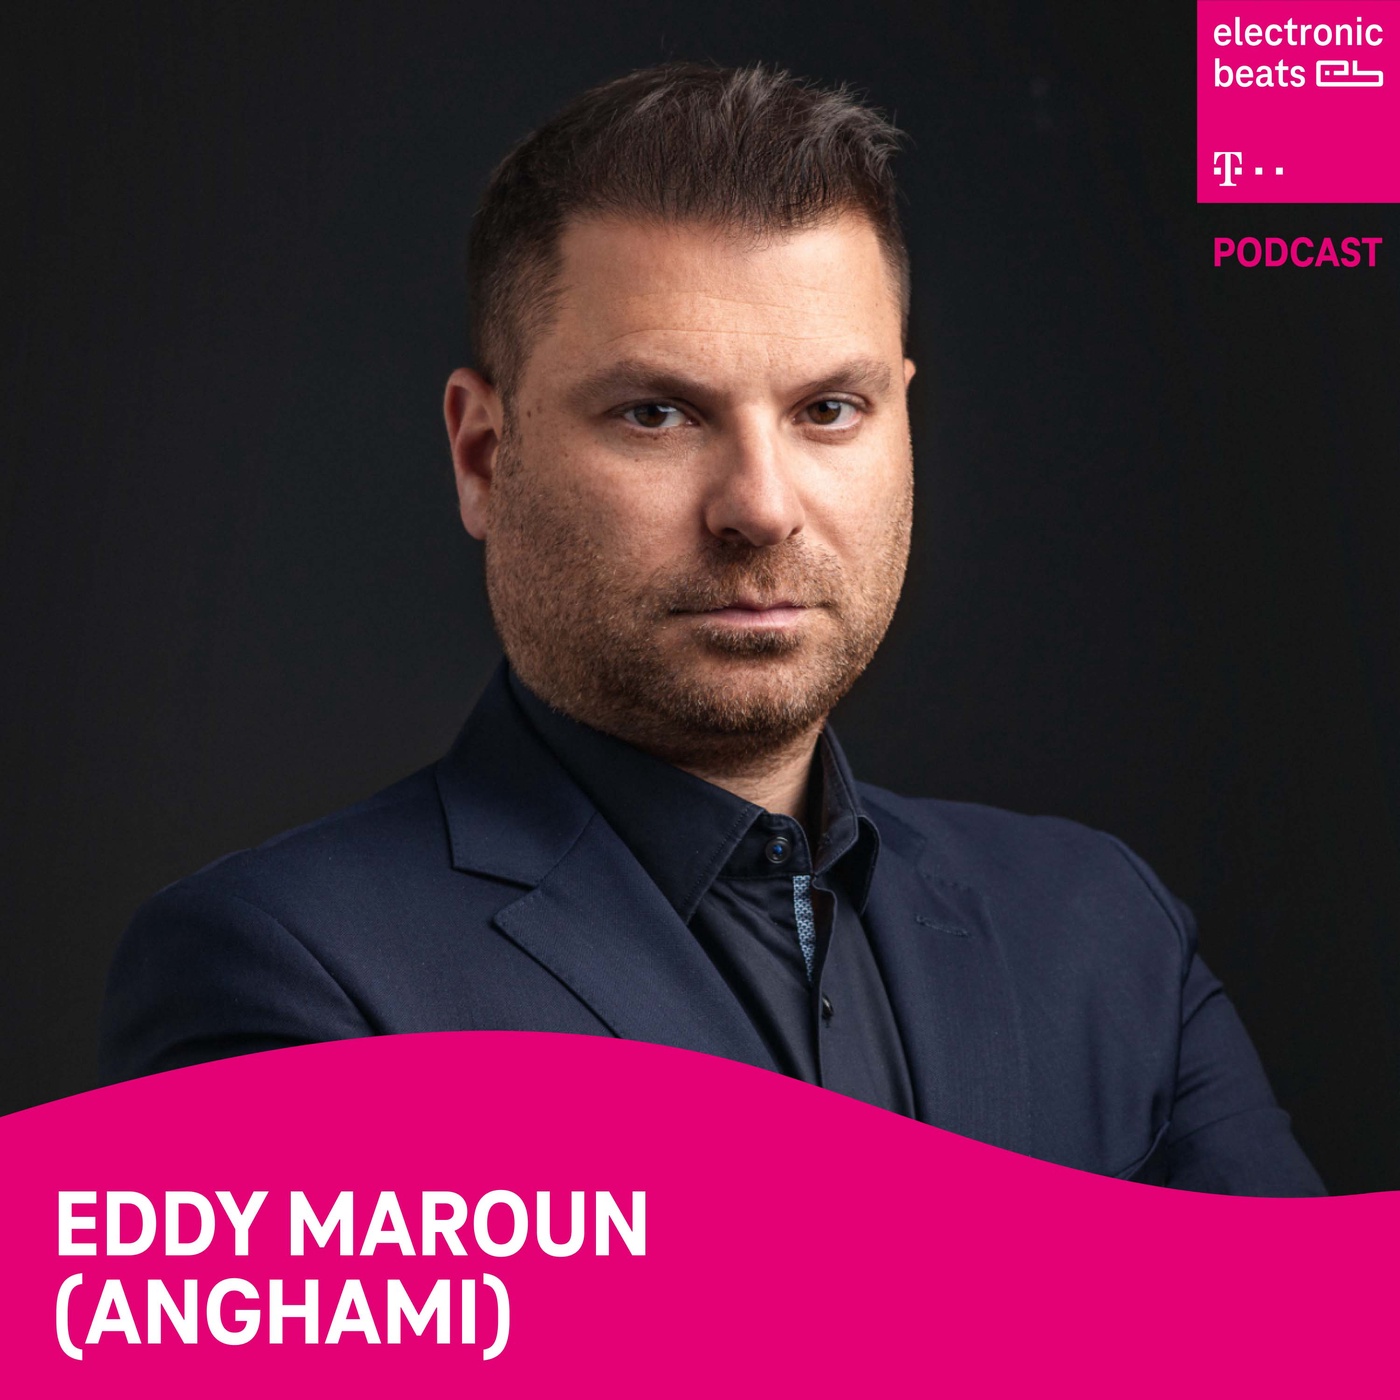 Eddy Maroun (Anghami) – the future of music streaming in the Arab world and beyond